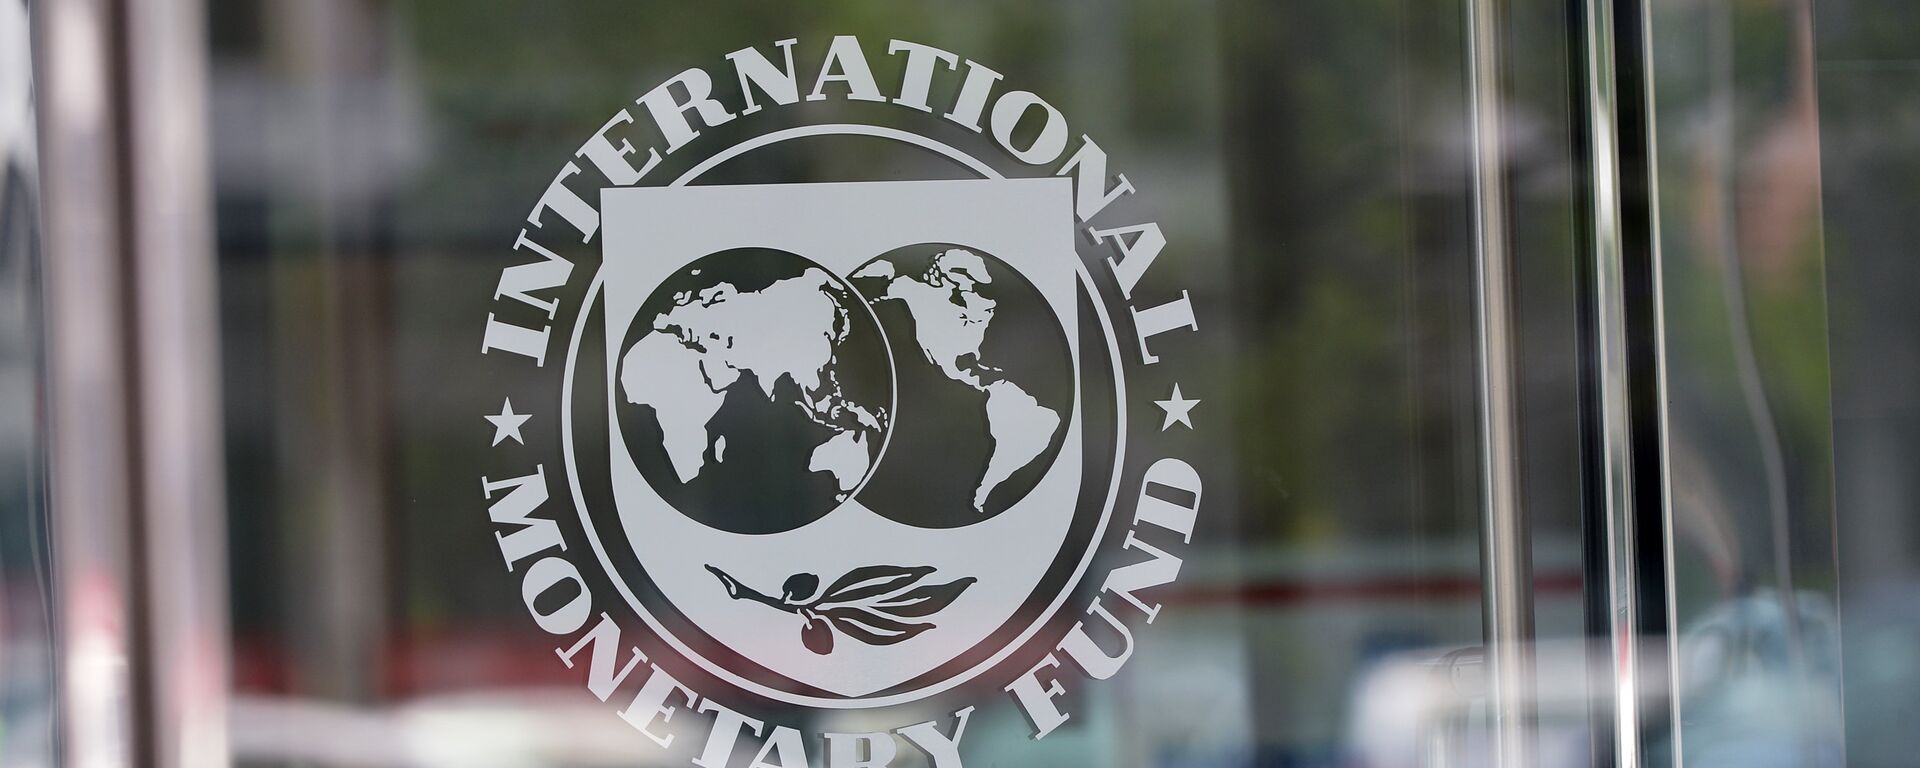 The seal of the International Monetary Fund is seen at the headquarters building in Washington, DC on July 5, 2015 - Sputnik International, 1920, 05.08.2022